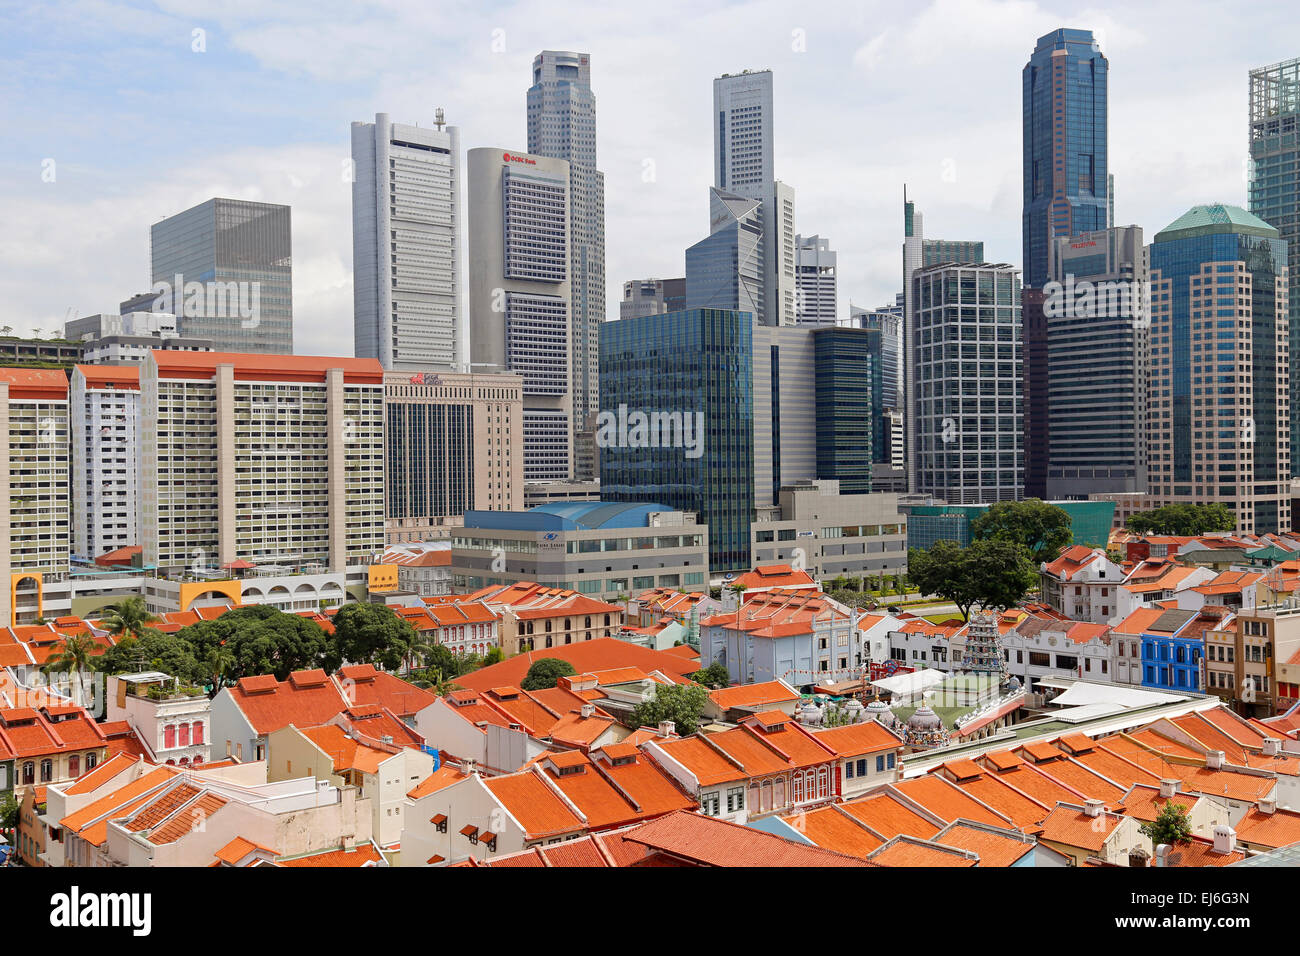 View of Chinatown towards the downtown area of Singapore Stock Photo